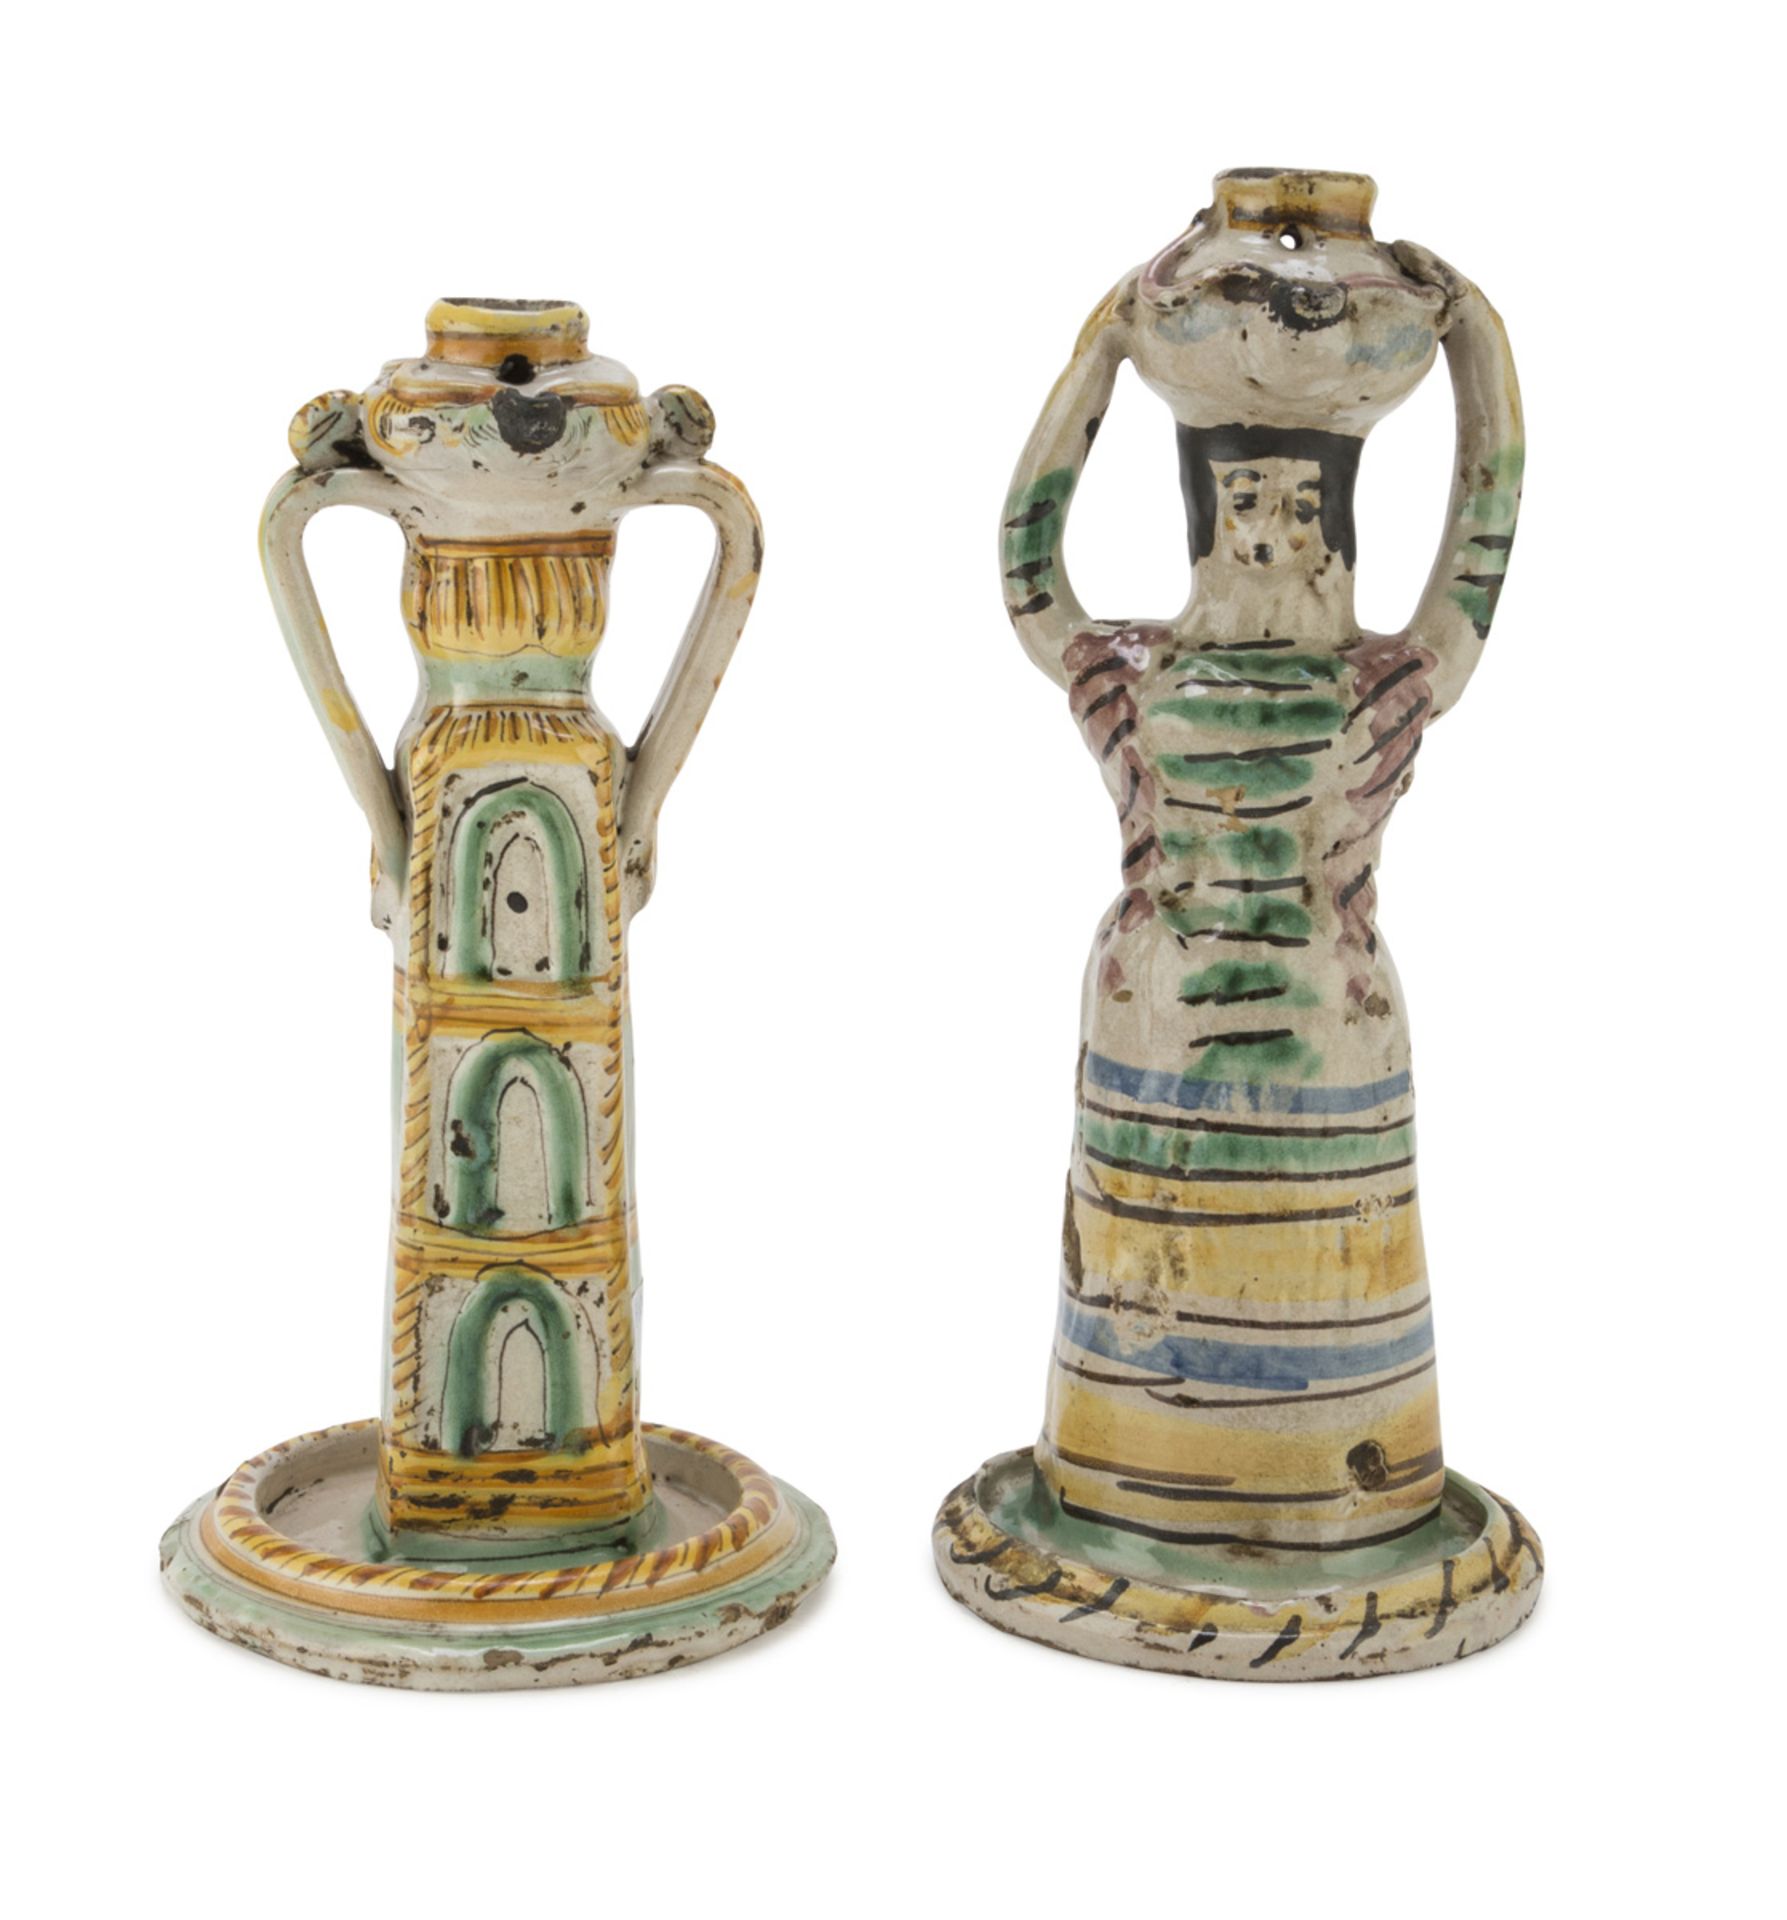 TWO RARE OIL LAMPS IN MAIOLICA, ARIAN IRPINO 18TH CENTURY in polychromy, shaped to tower with oil